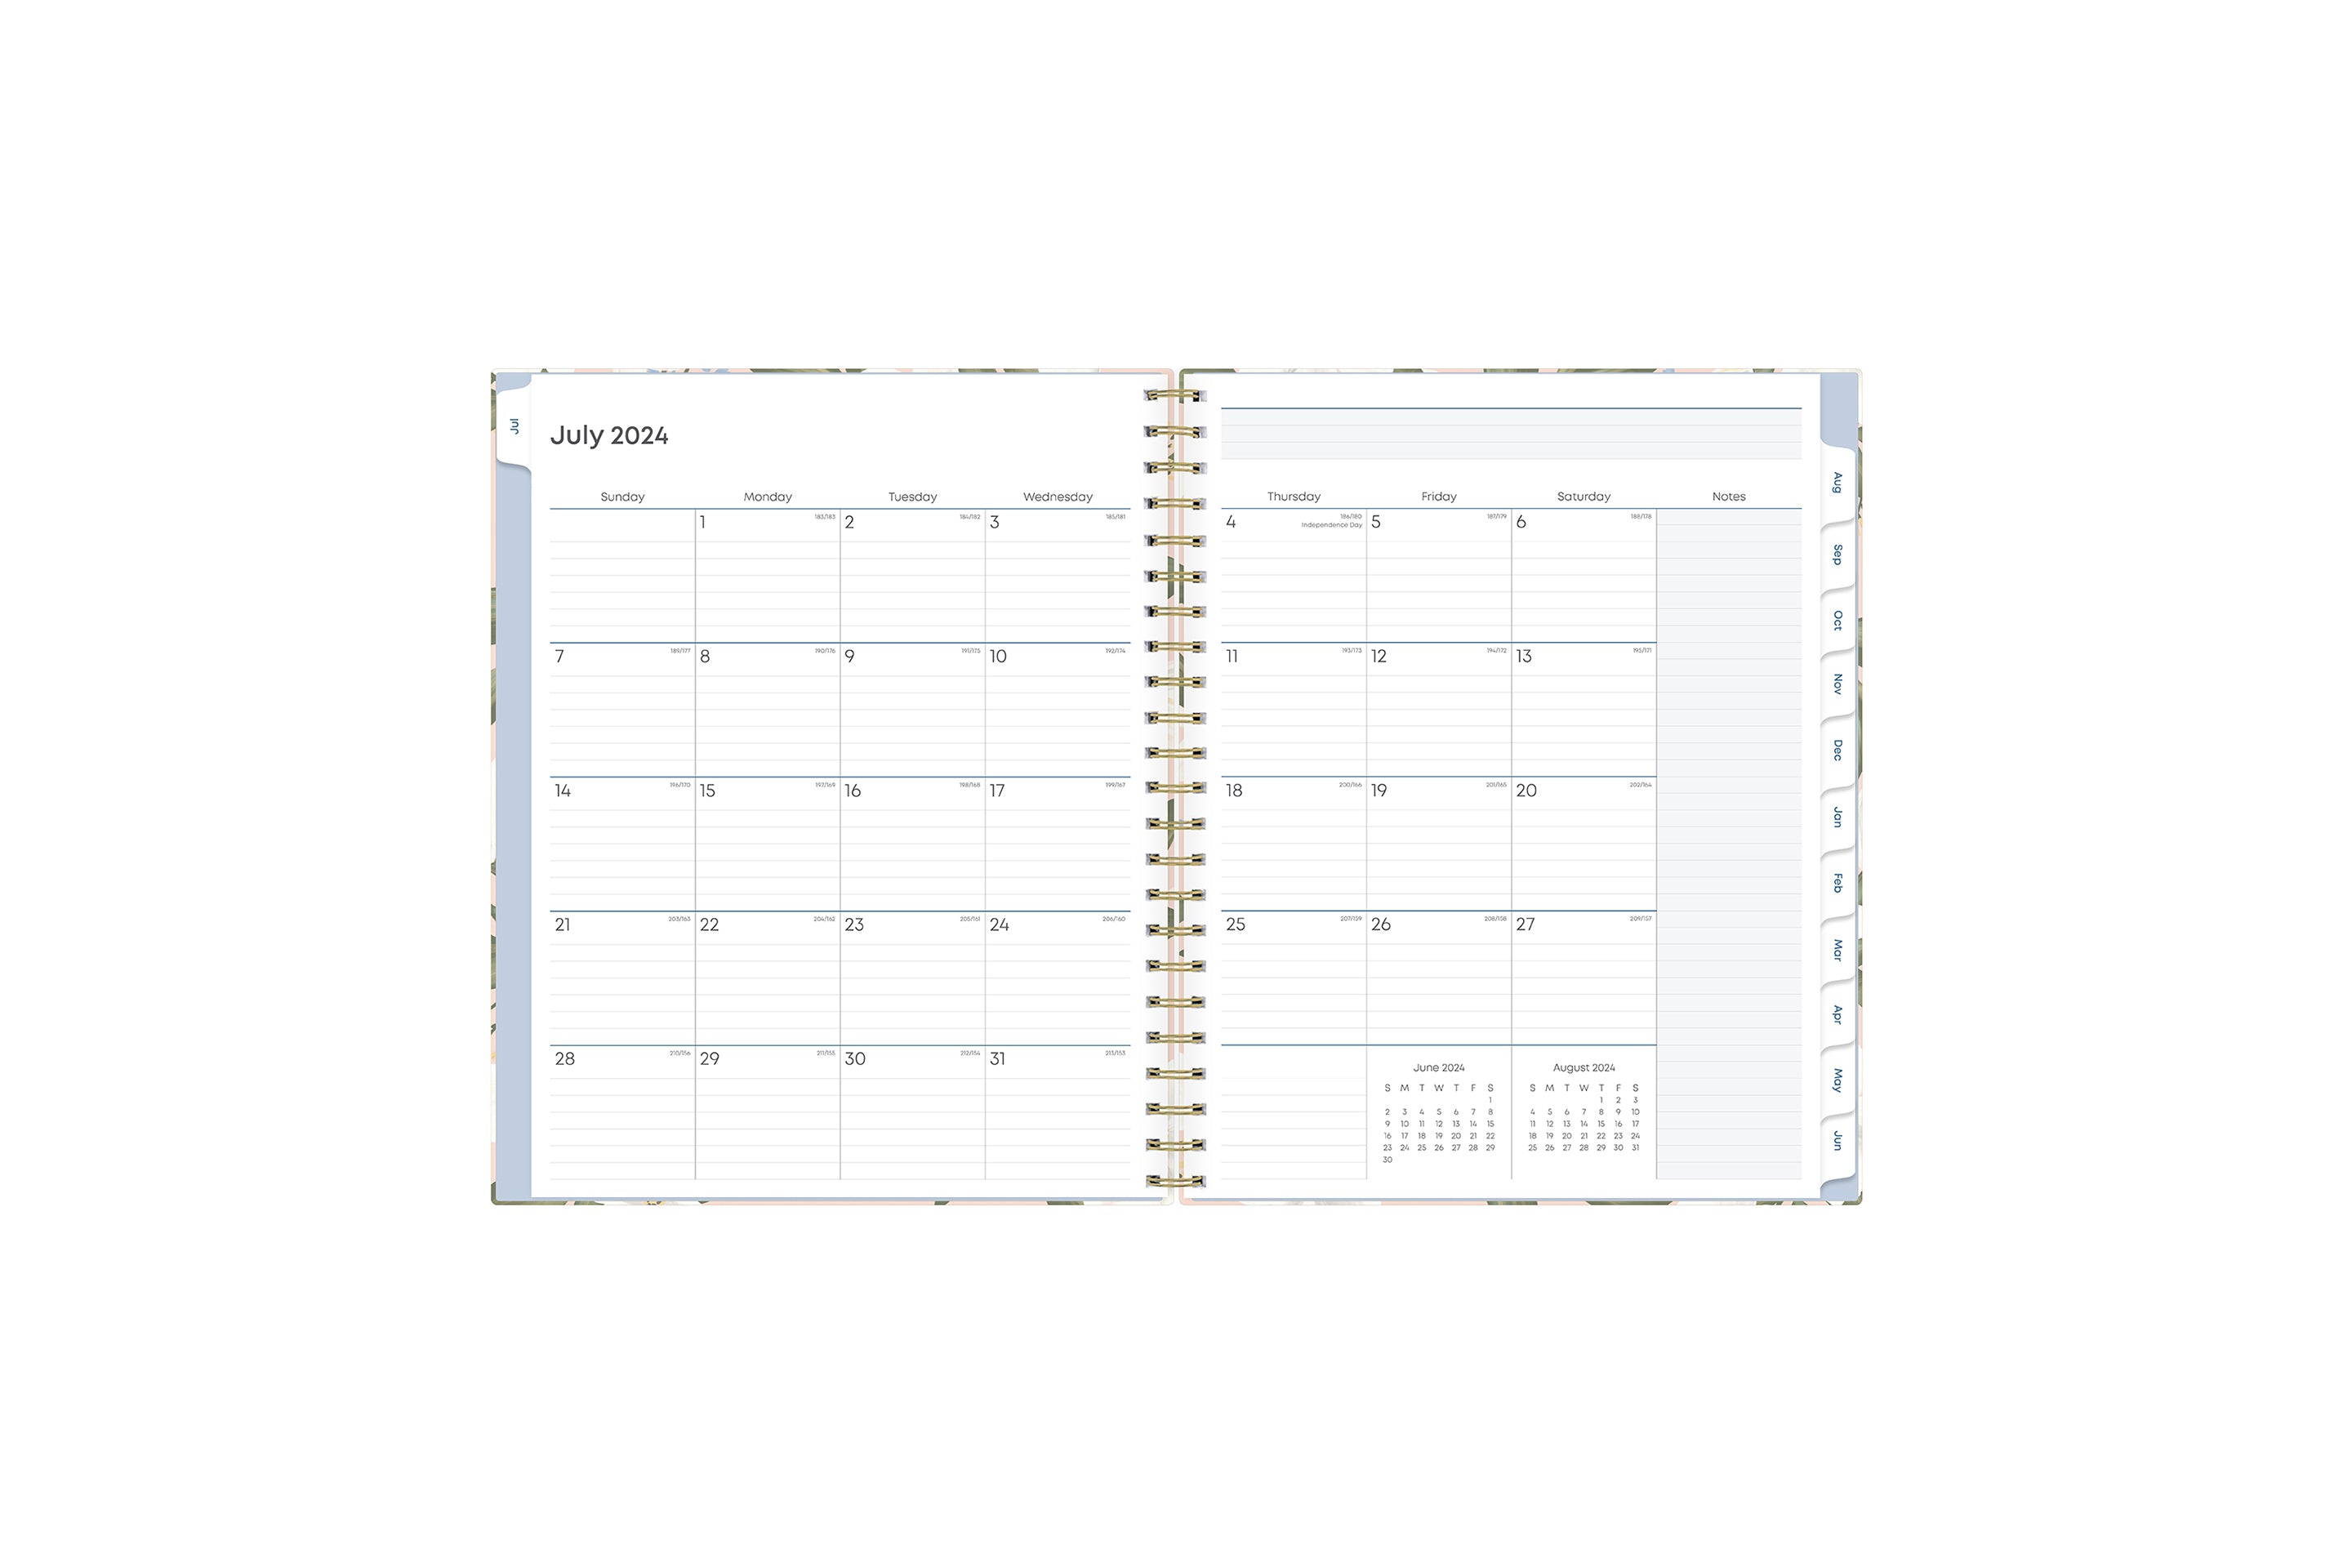  teacher lesson planner monthly view featuring clean writing space for projects, field trips, goals, deadlines, notes section, reference calendars and white monthly tabs in 8.5x11 size